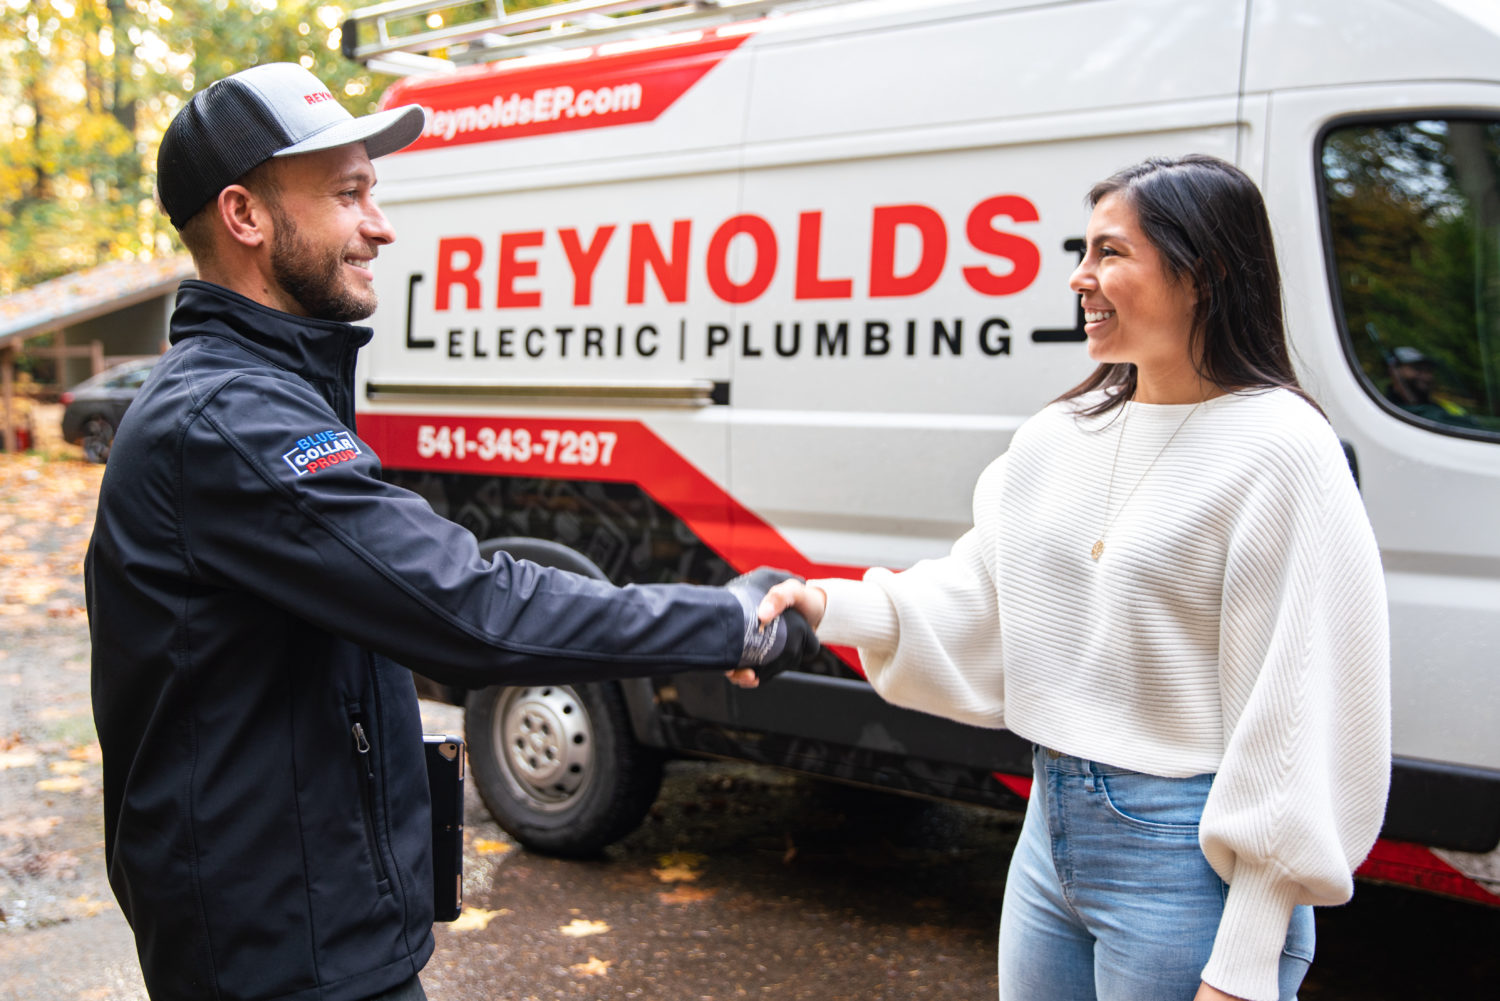 Homeowner shaking hands with Reynolds technician with Reynolds service truck in the background.